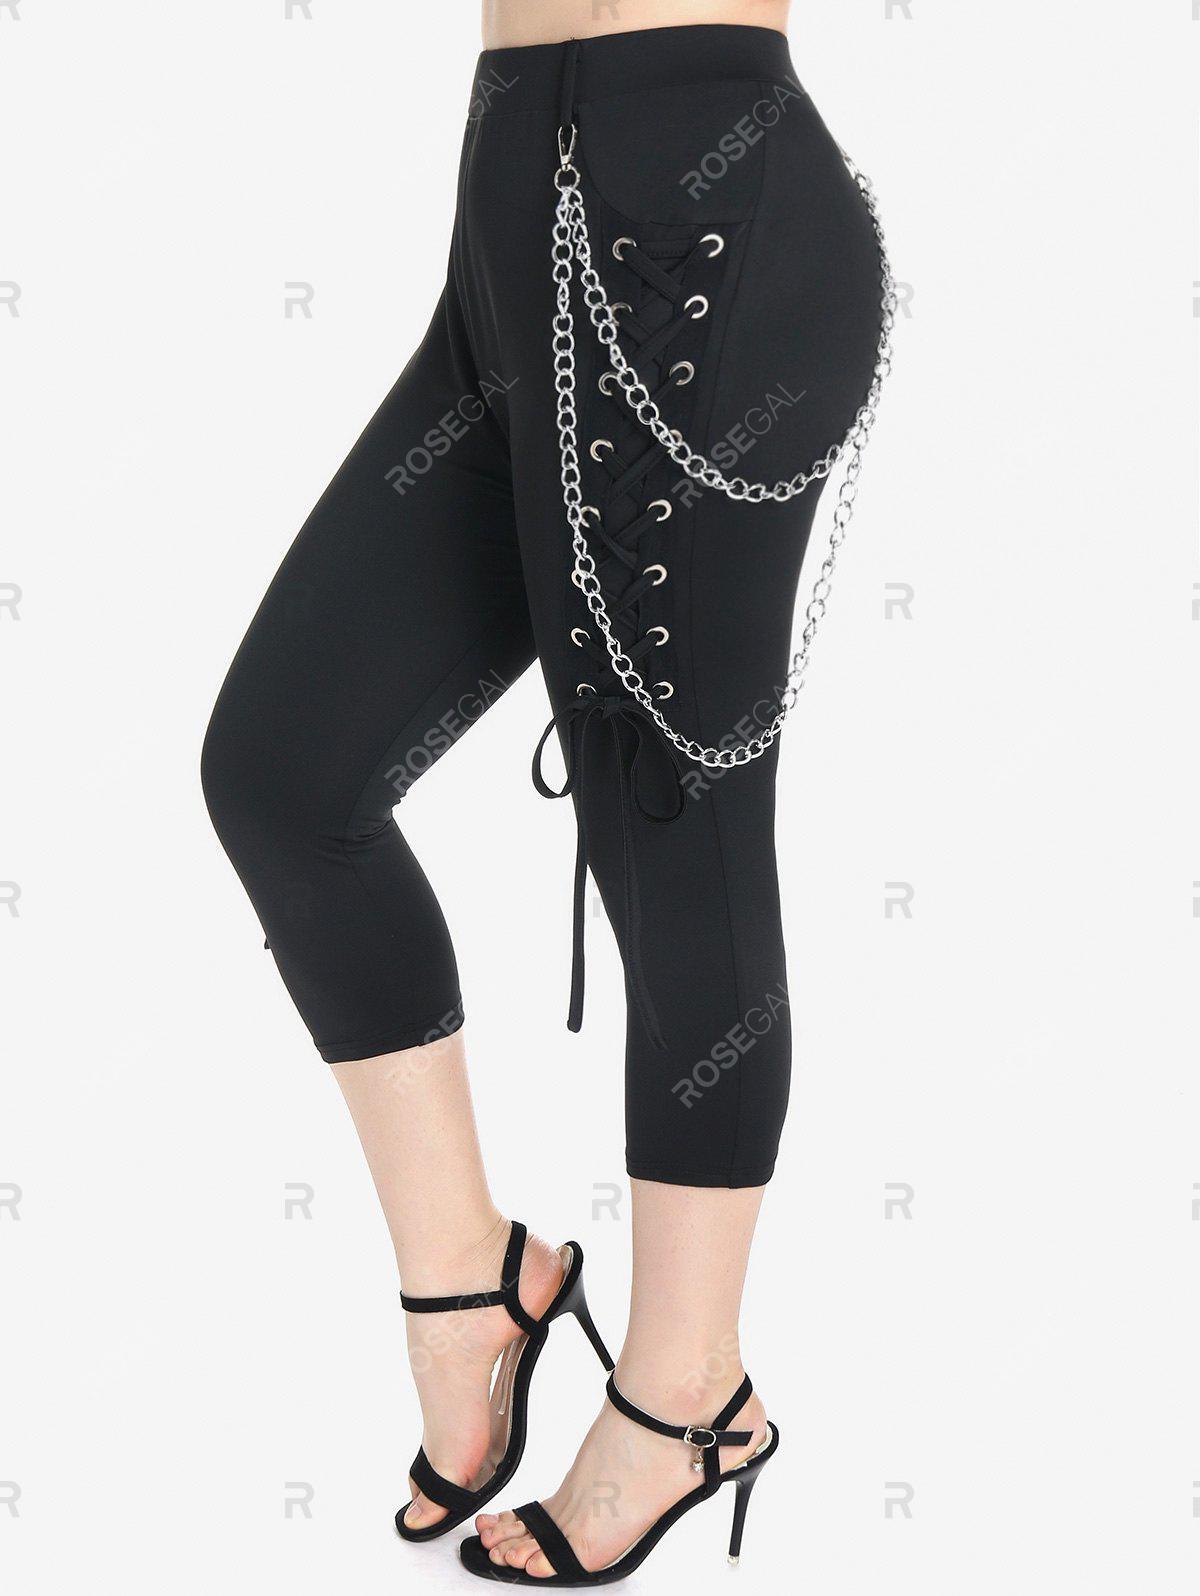 Lace Insert Handkerchief T Shirt and Lace Up Chains Gothic Capri Pants Plus Size Summer Outfit